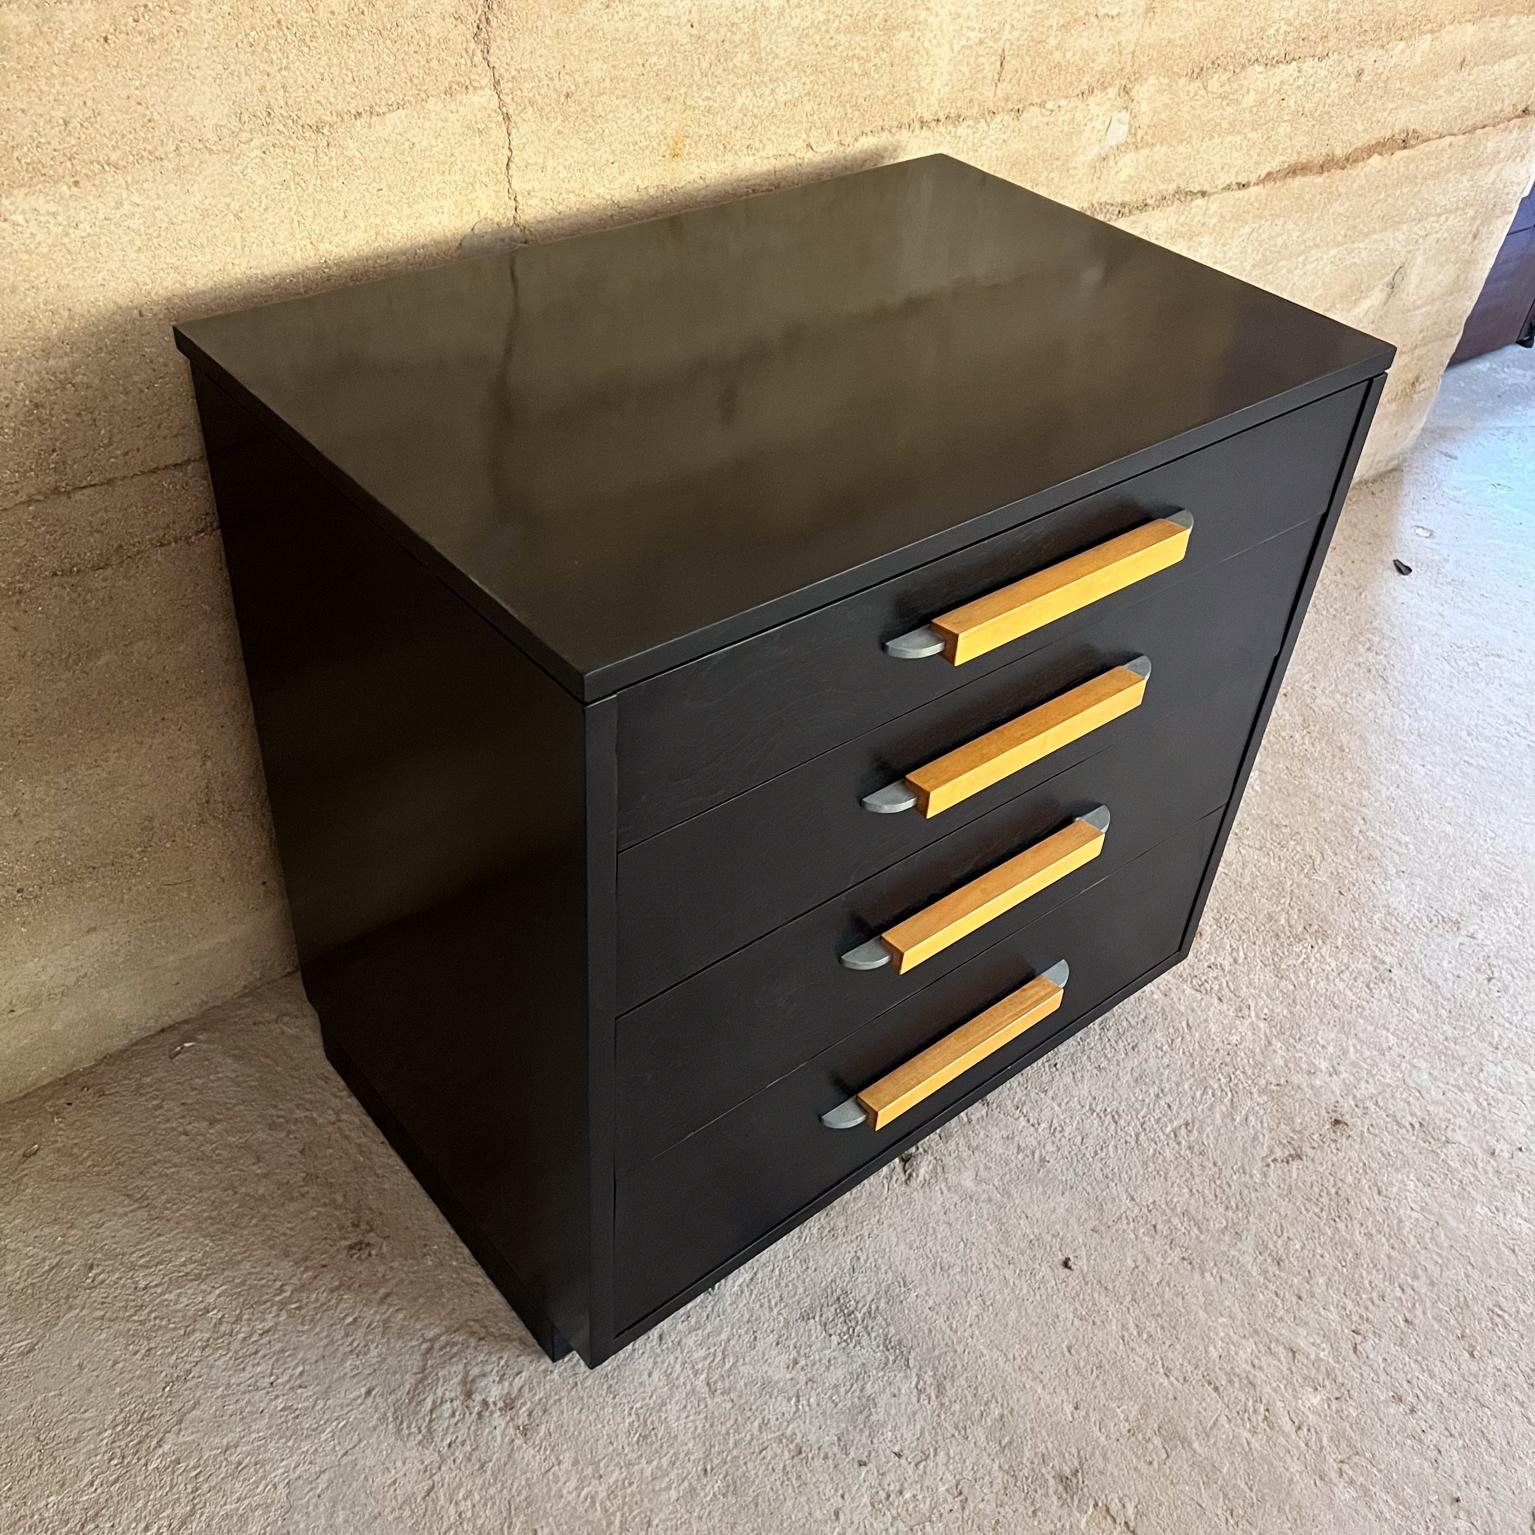 Midcentury modern dresser designed by Eliel Saarinen Johnson Furniture Co. Ebonized oakwood mahogany base.
Dresser for FHA collection 
Primavera wood handles in solid wood sculptural aluminum.
Double dove tail joinery. 
30 w x 30 h X 20 d
No label